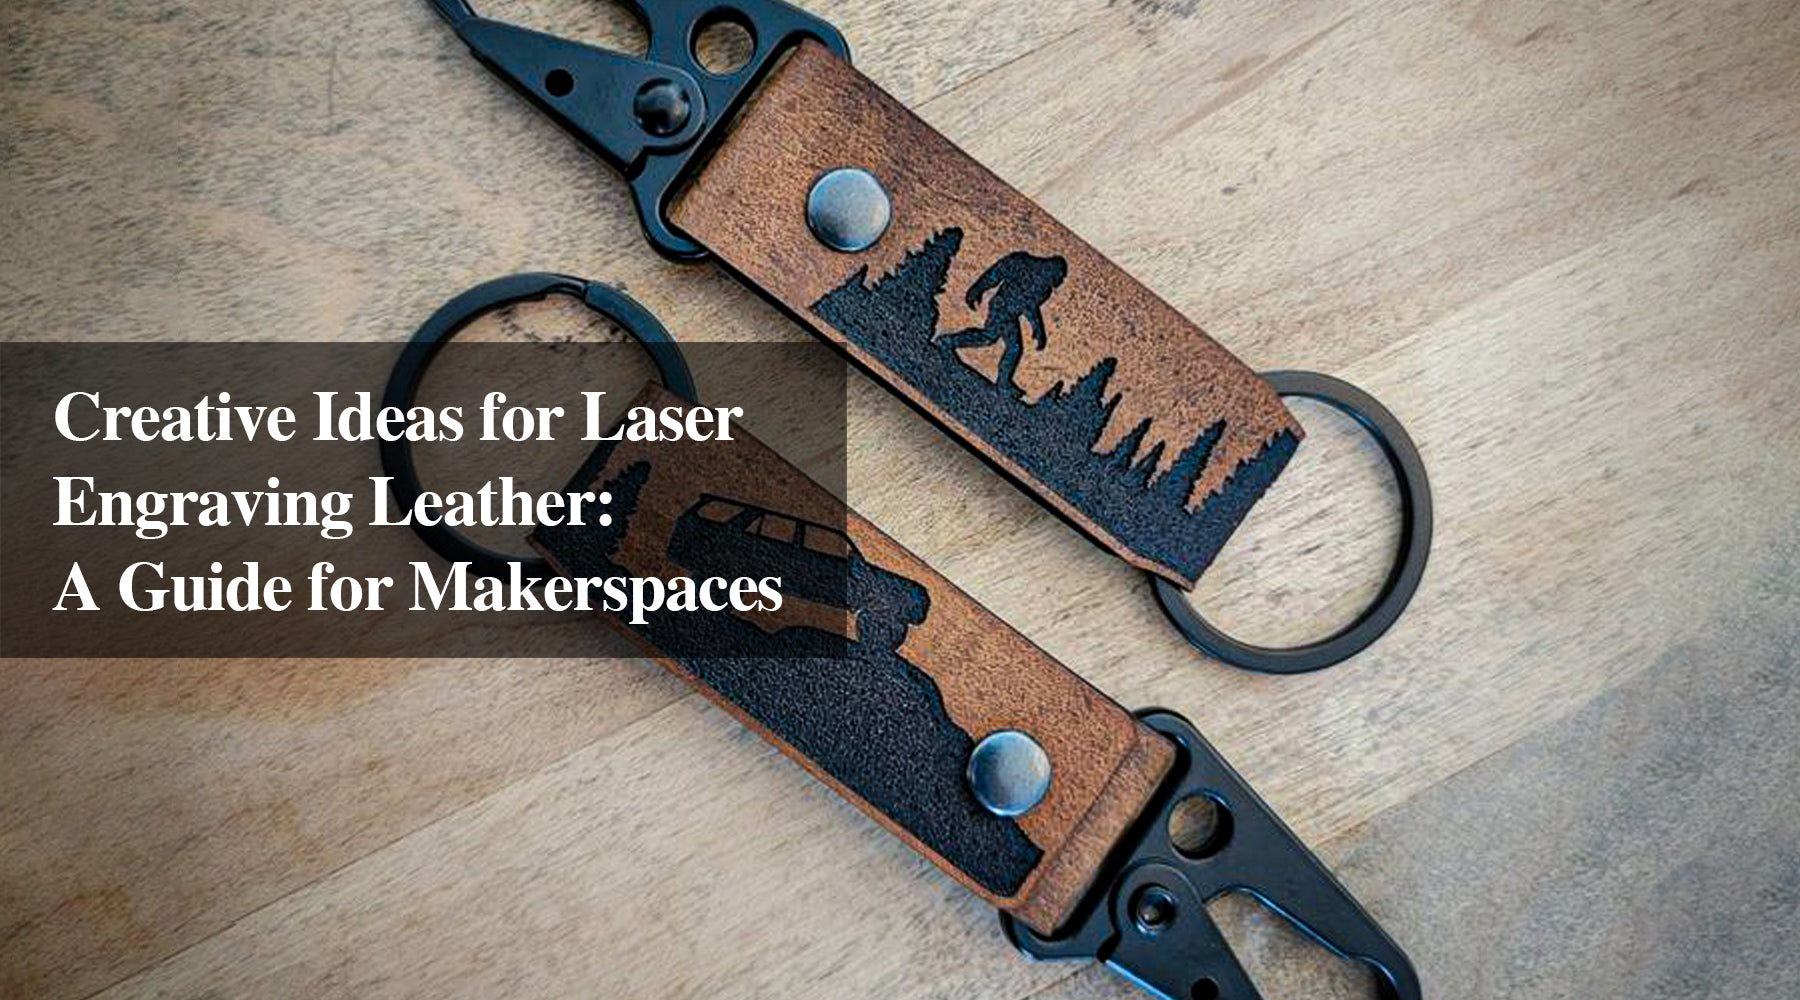 Creative Ideas for Laser Engraving Leather: A Guide for Makerspaces